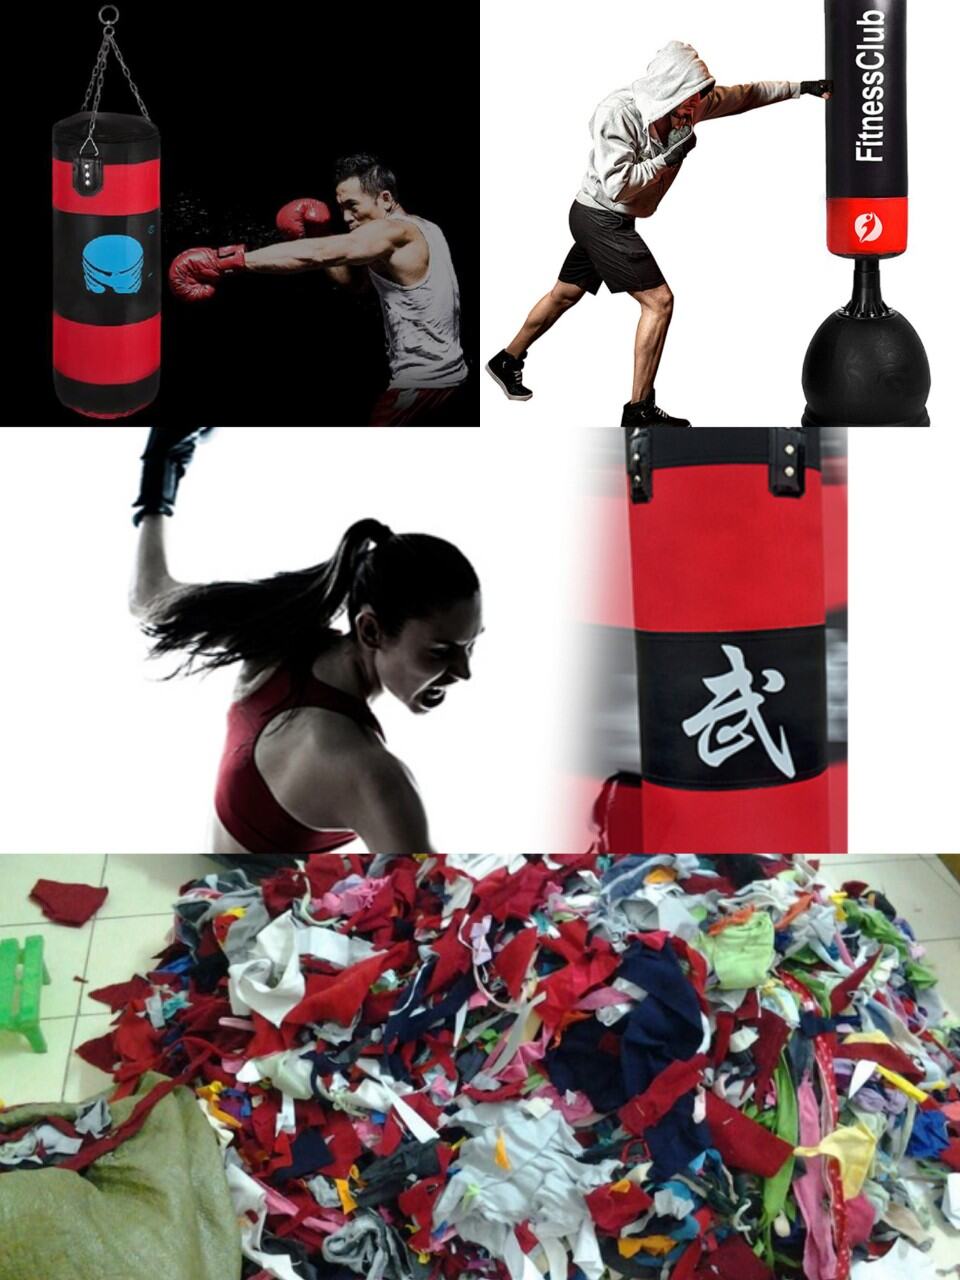 Future Champs Electronic Inflatable Boxing Bag - 2 Game Modes: Boxing Or  Kickboxing Light - 60